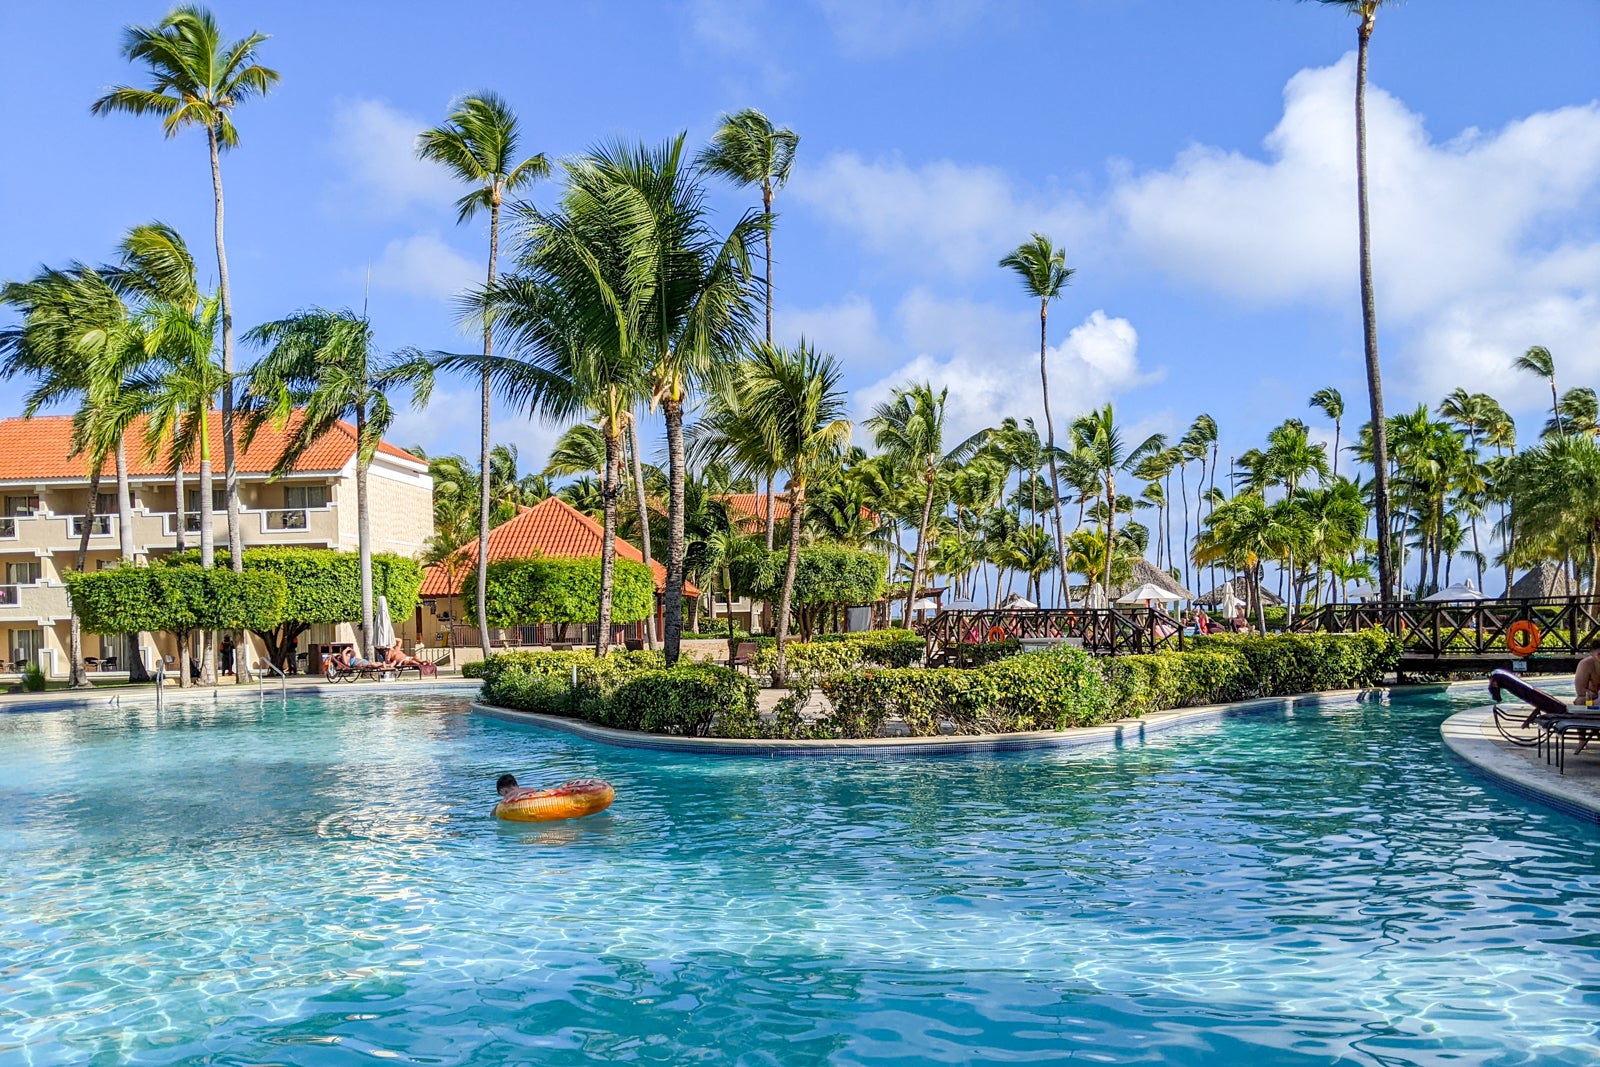 7 things to know before booking a stay at Dreams Palm Beach Punta Cana